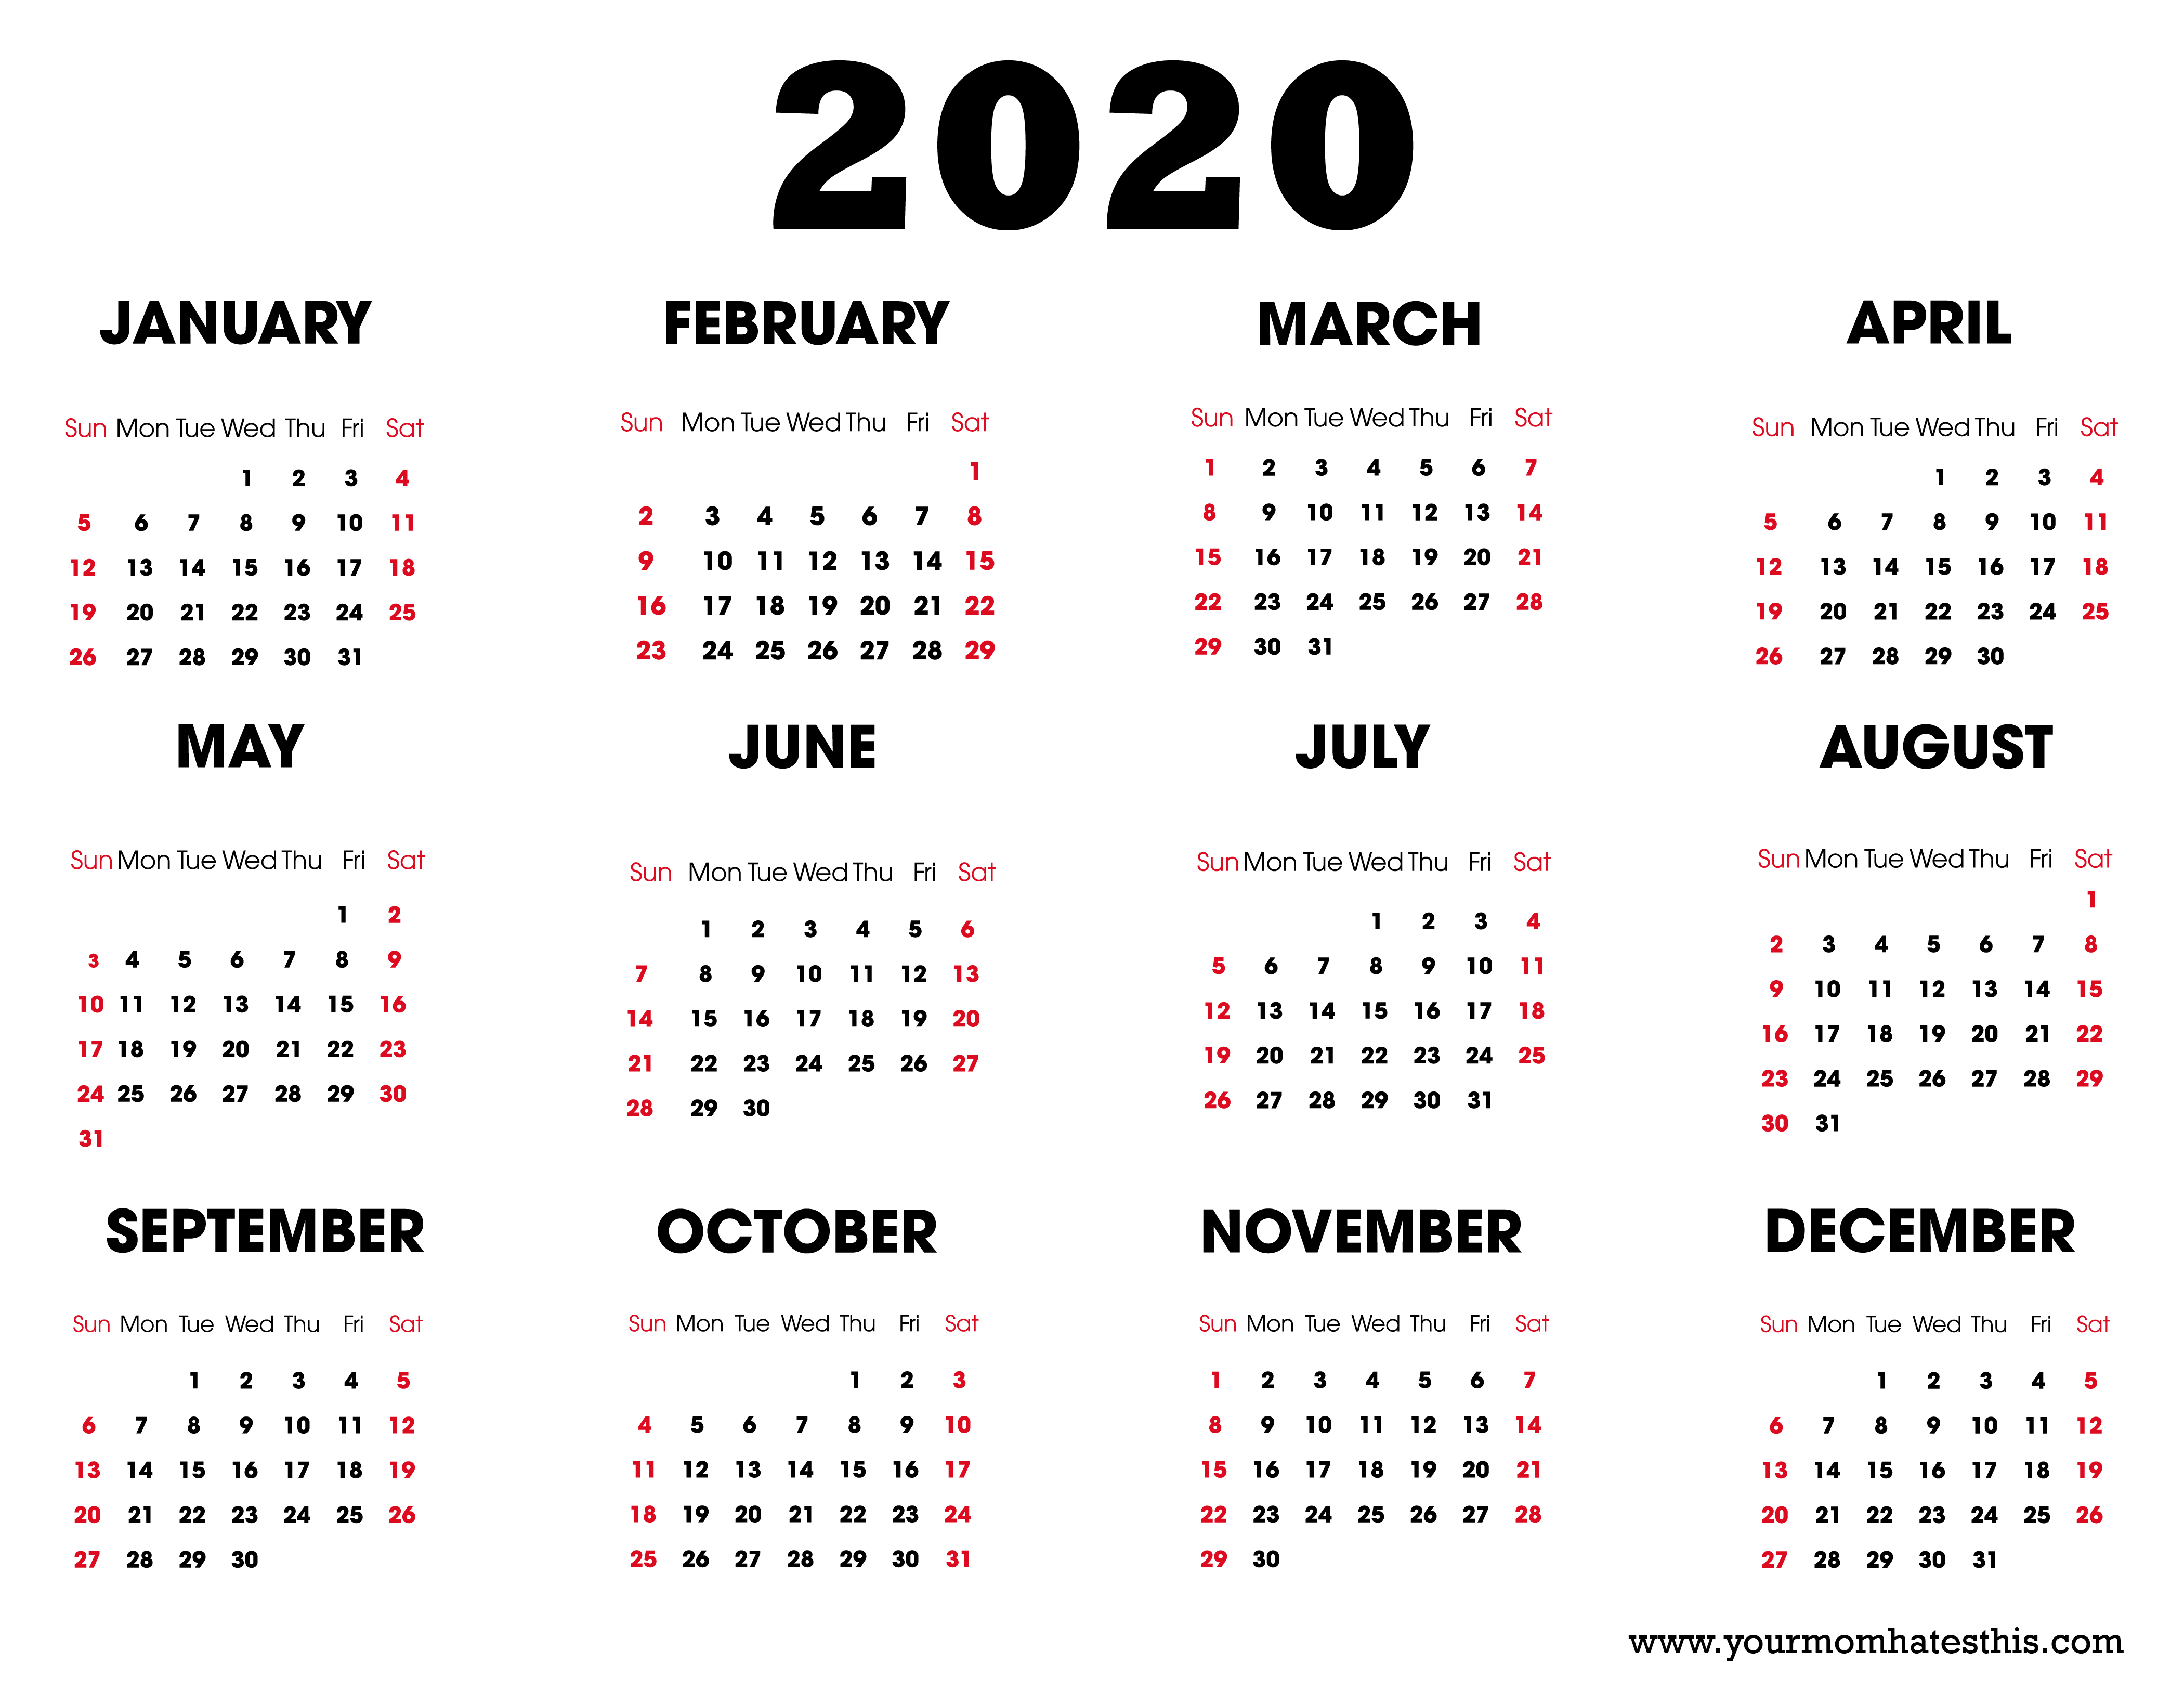 Calendars For 2020 And 2020 - Wpa.wpart.co